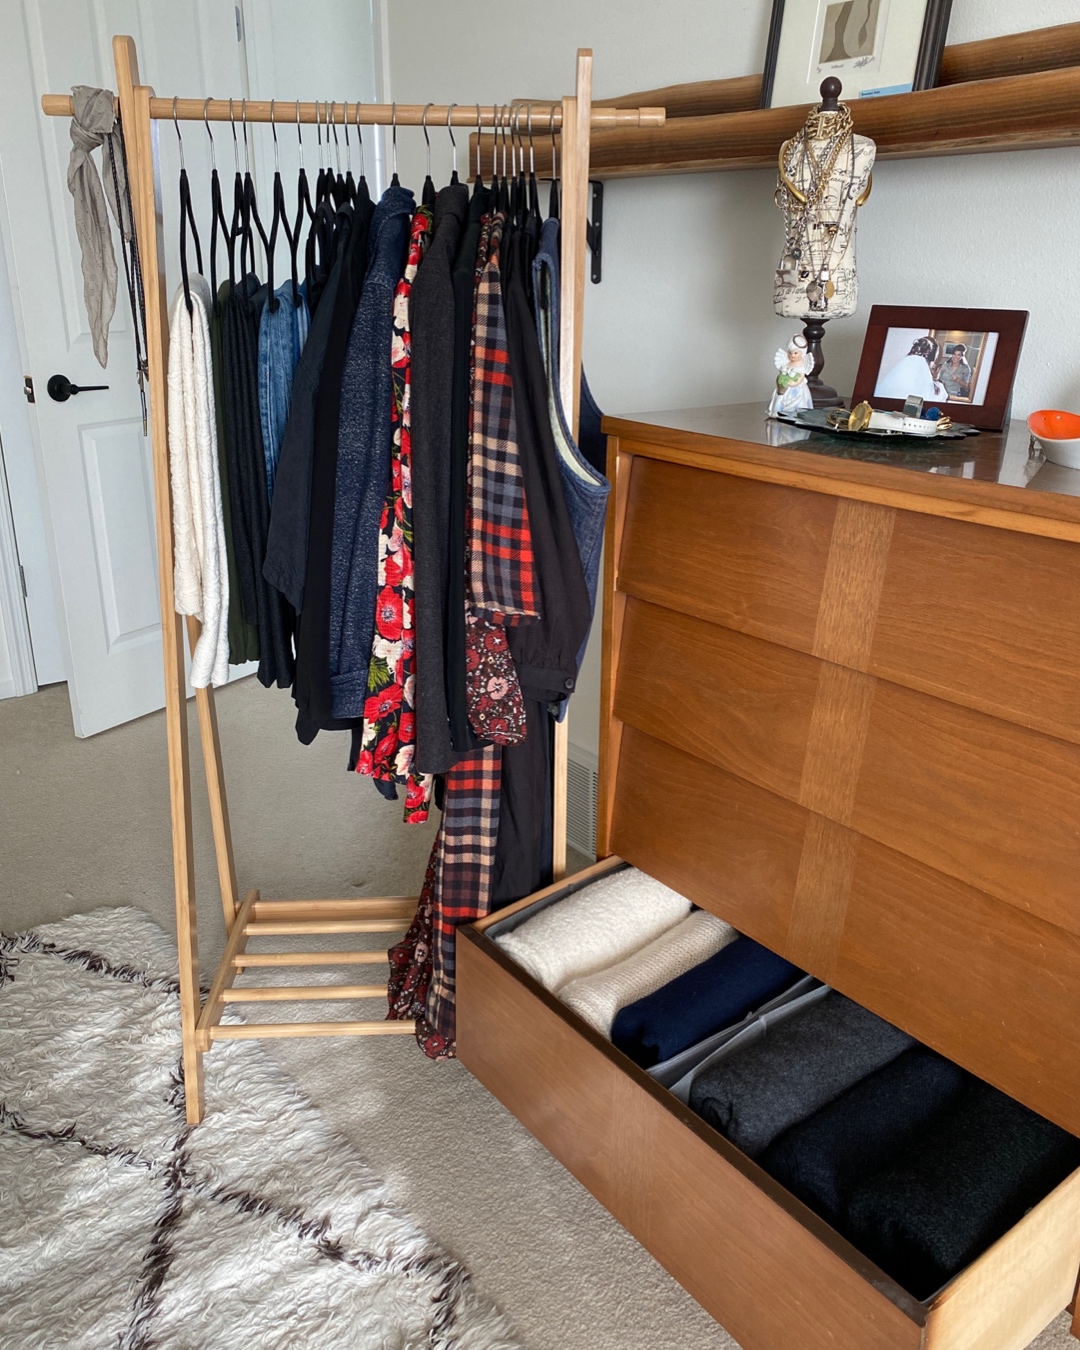 You are currently viewing Minimalist Wardrobe – A Casual and Cozy Winter Capsule Wardrobe